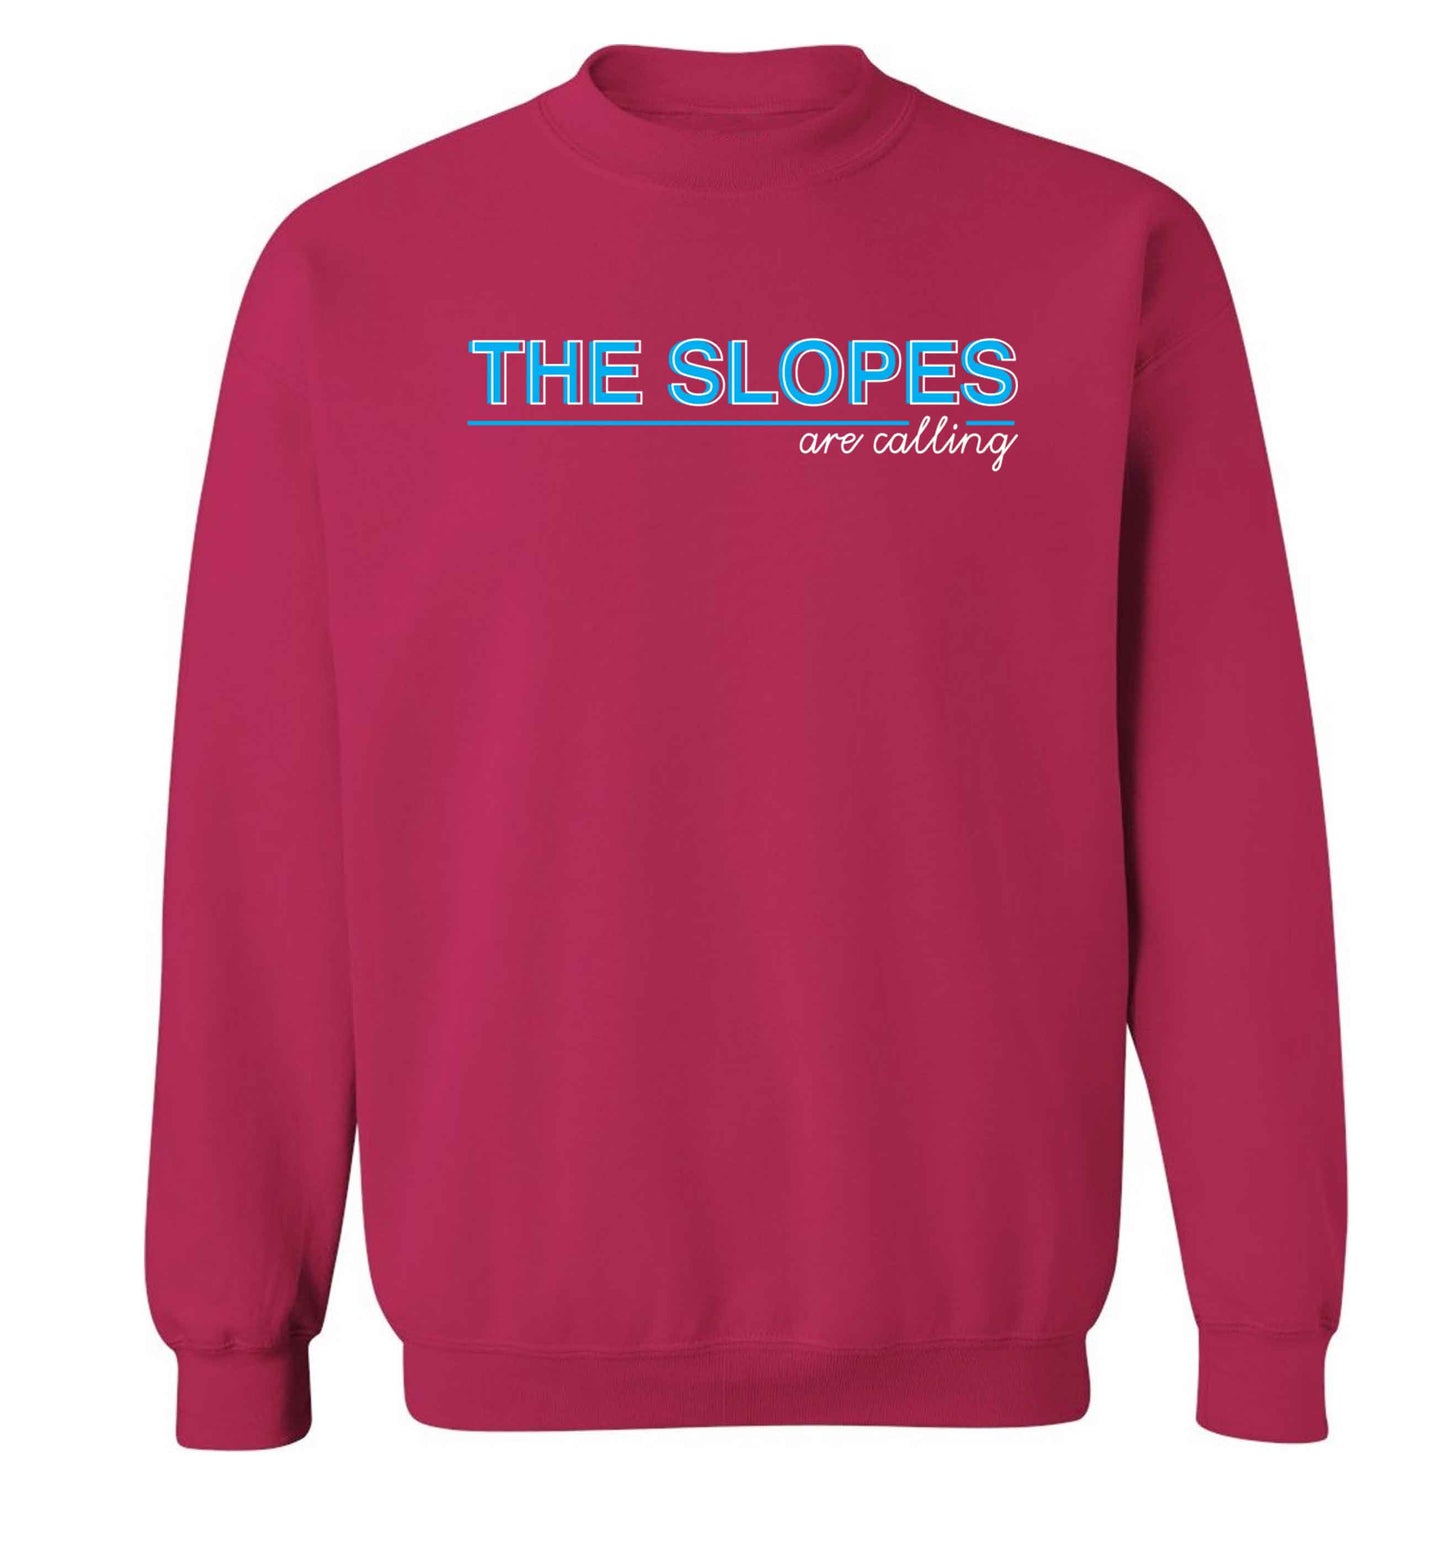 The slopes are calling Adult's unisex pink Sweater 2XL